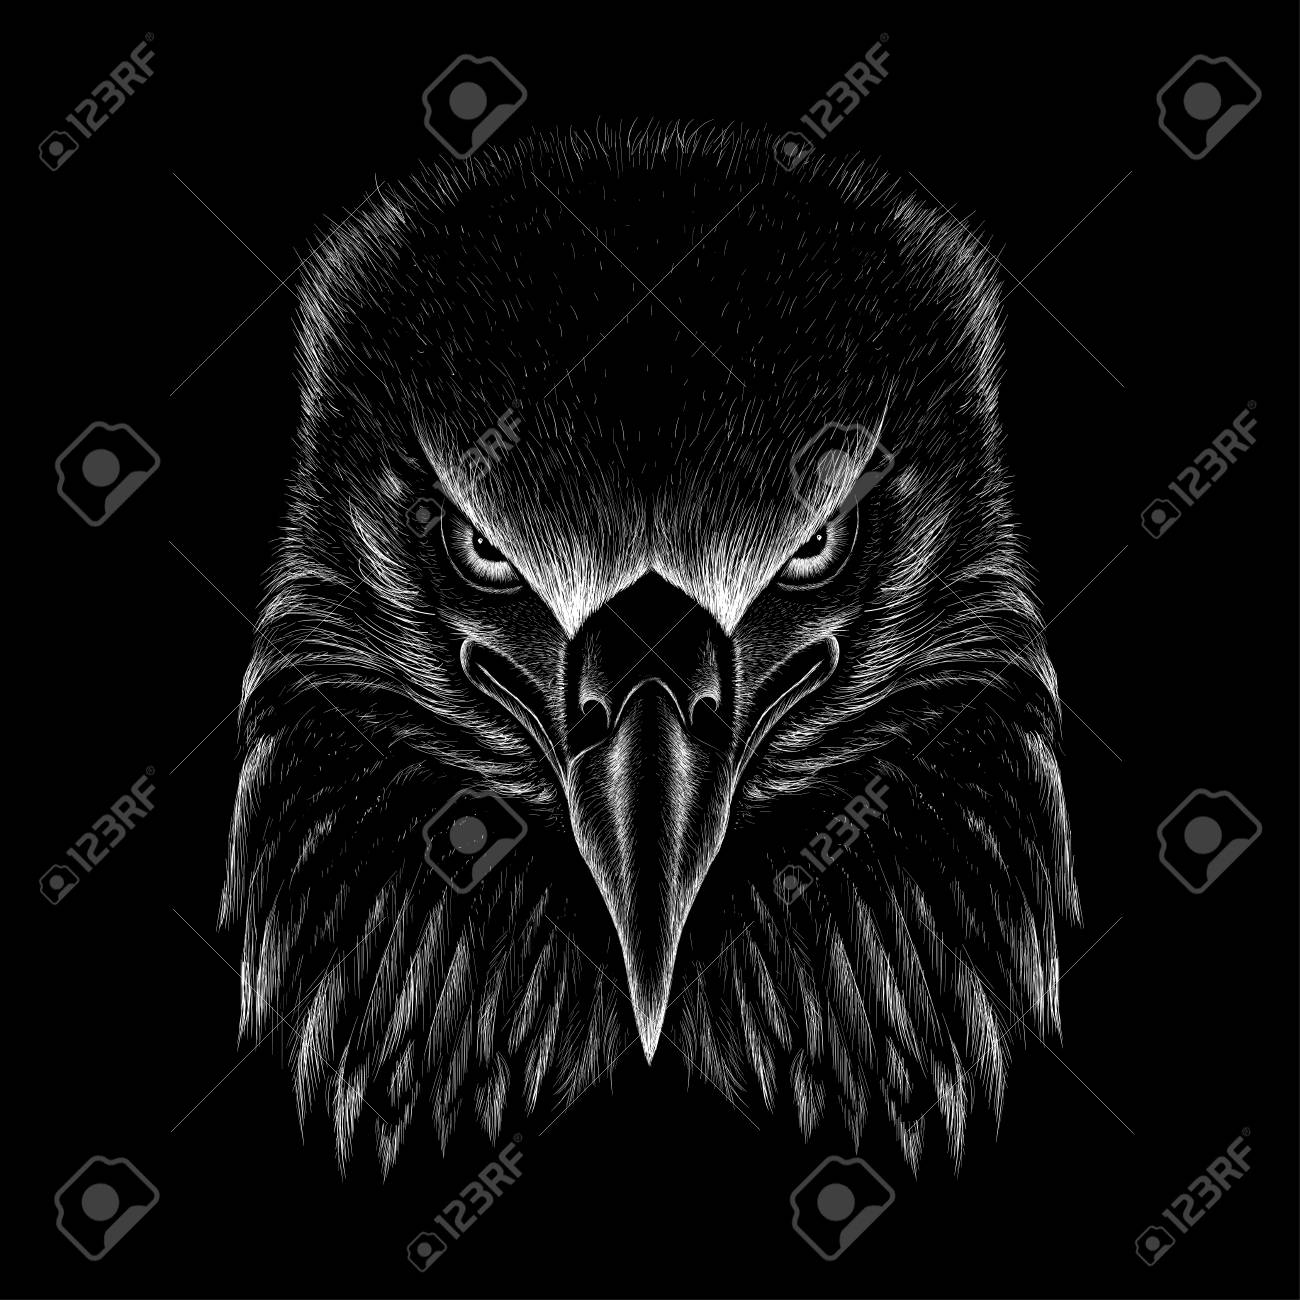 The Vector Eagle For T Shirt Design Or Outwear Hunting Style